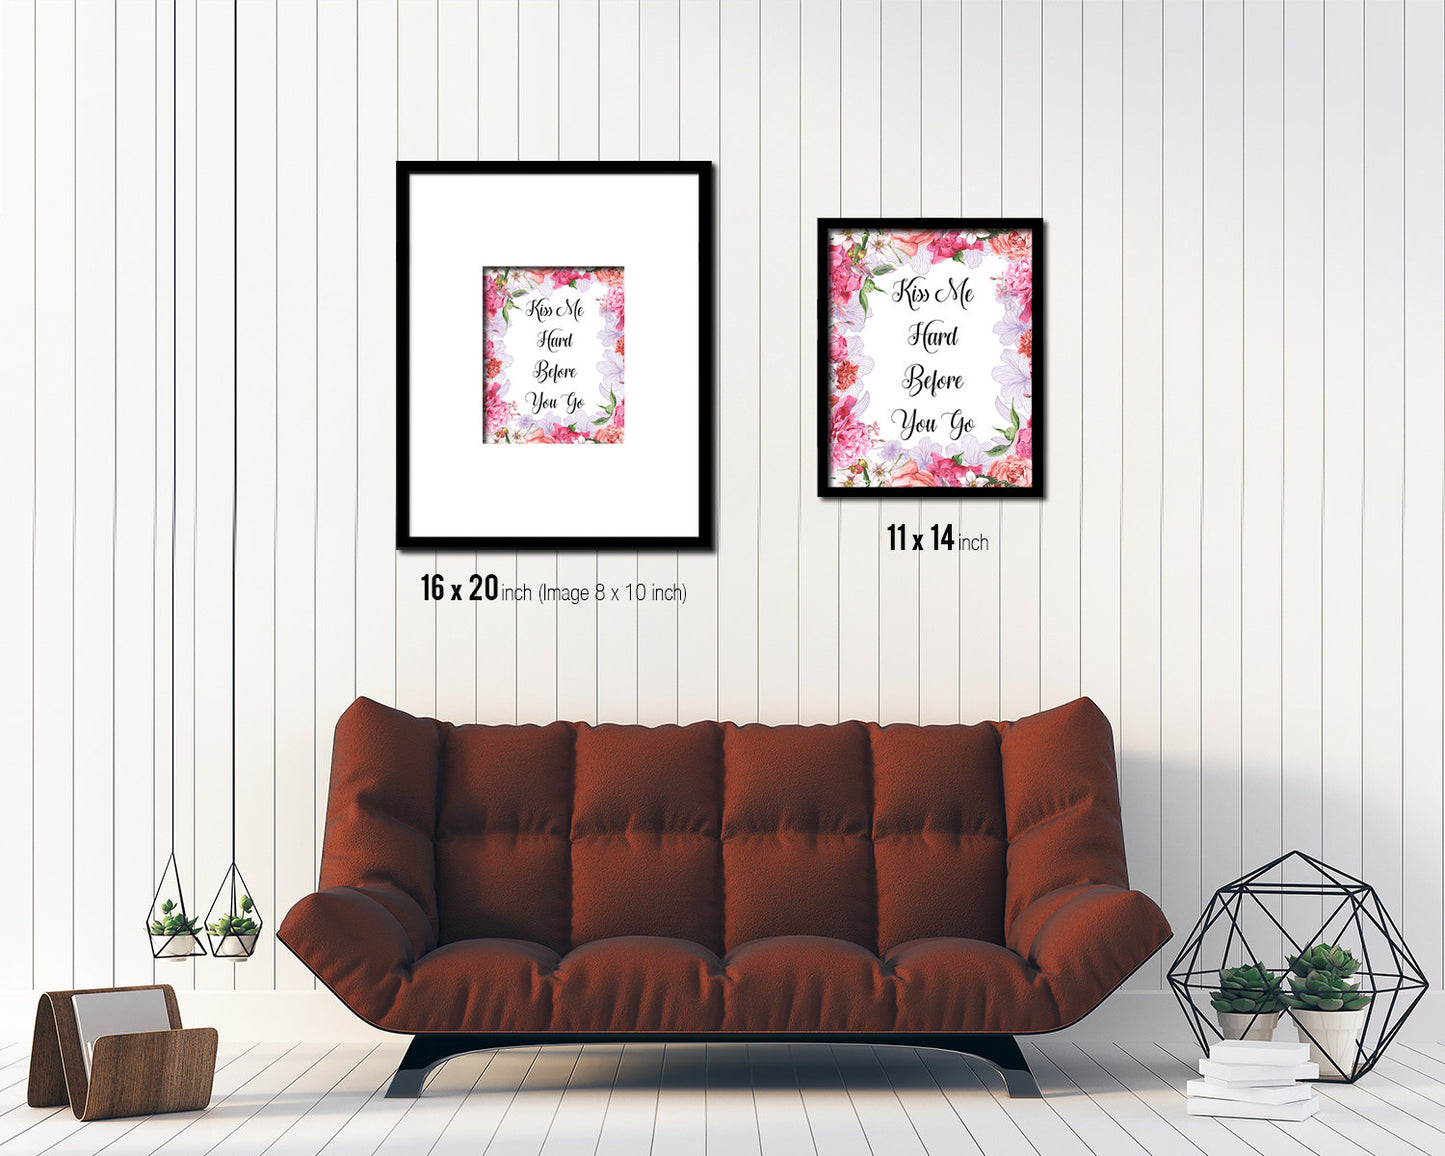 Kiss me hard before you go Quote Framed Print Home Decor Wall Art Gifts